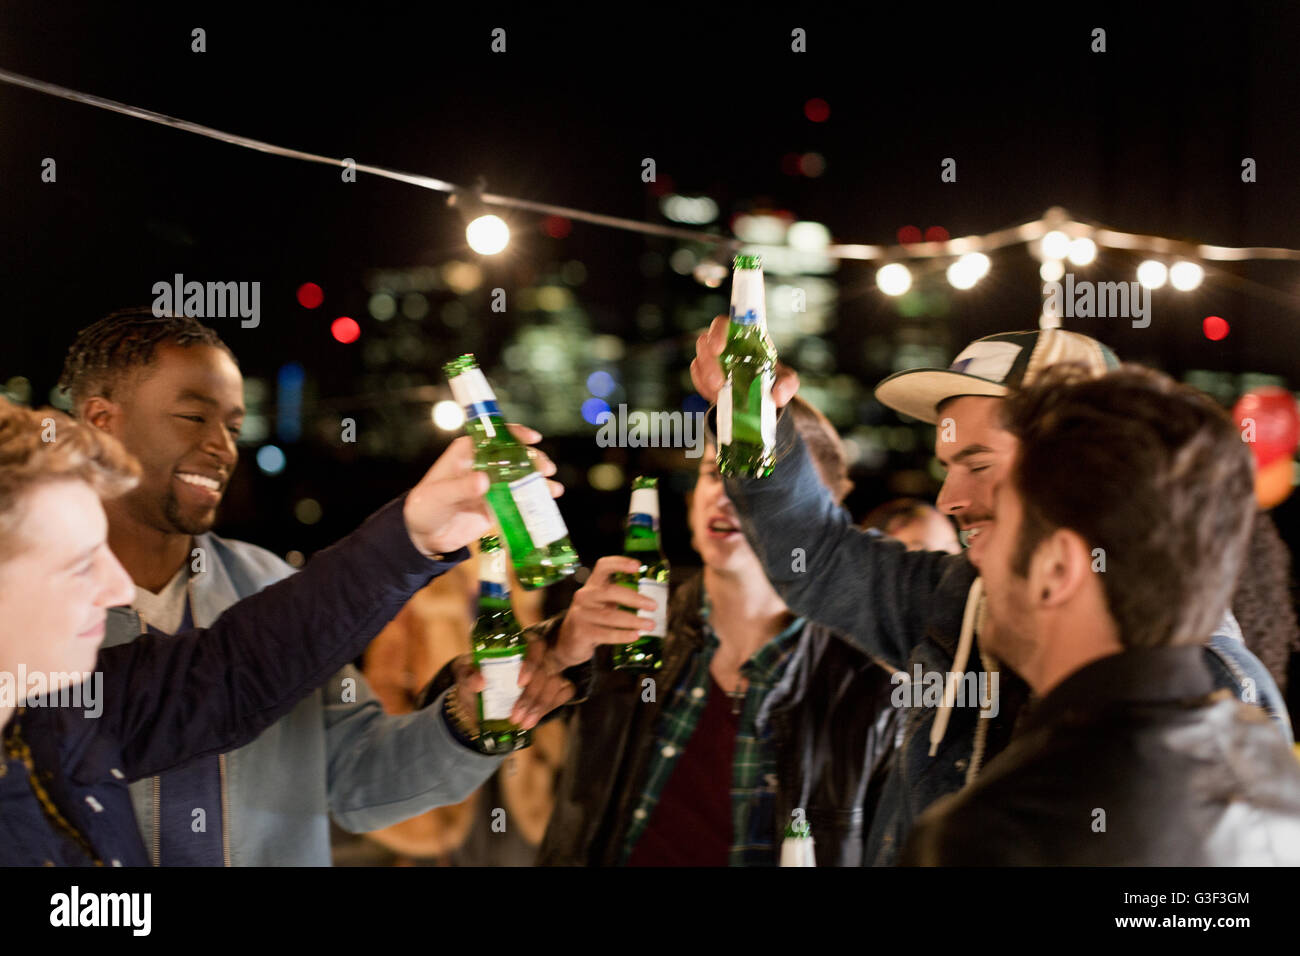 Young men drinking beer and dancing at rooftop party Stock Photo